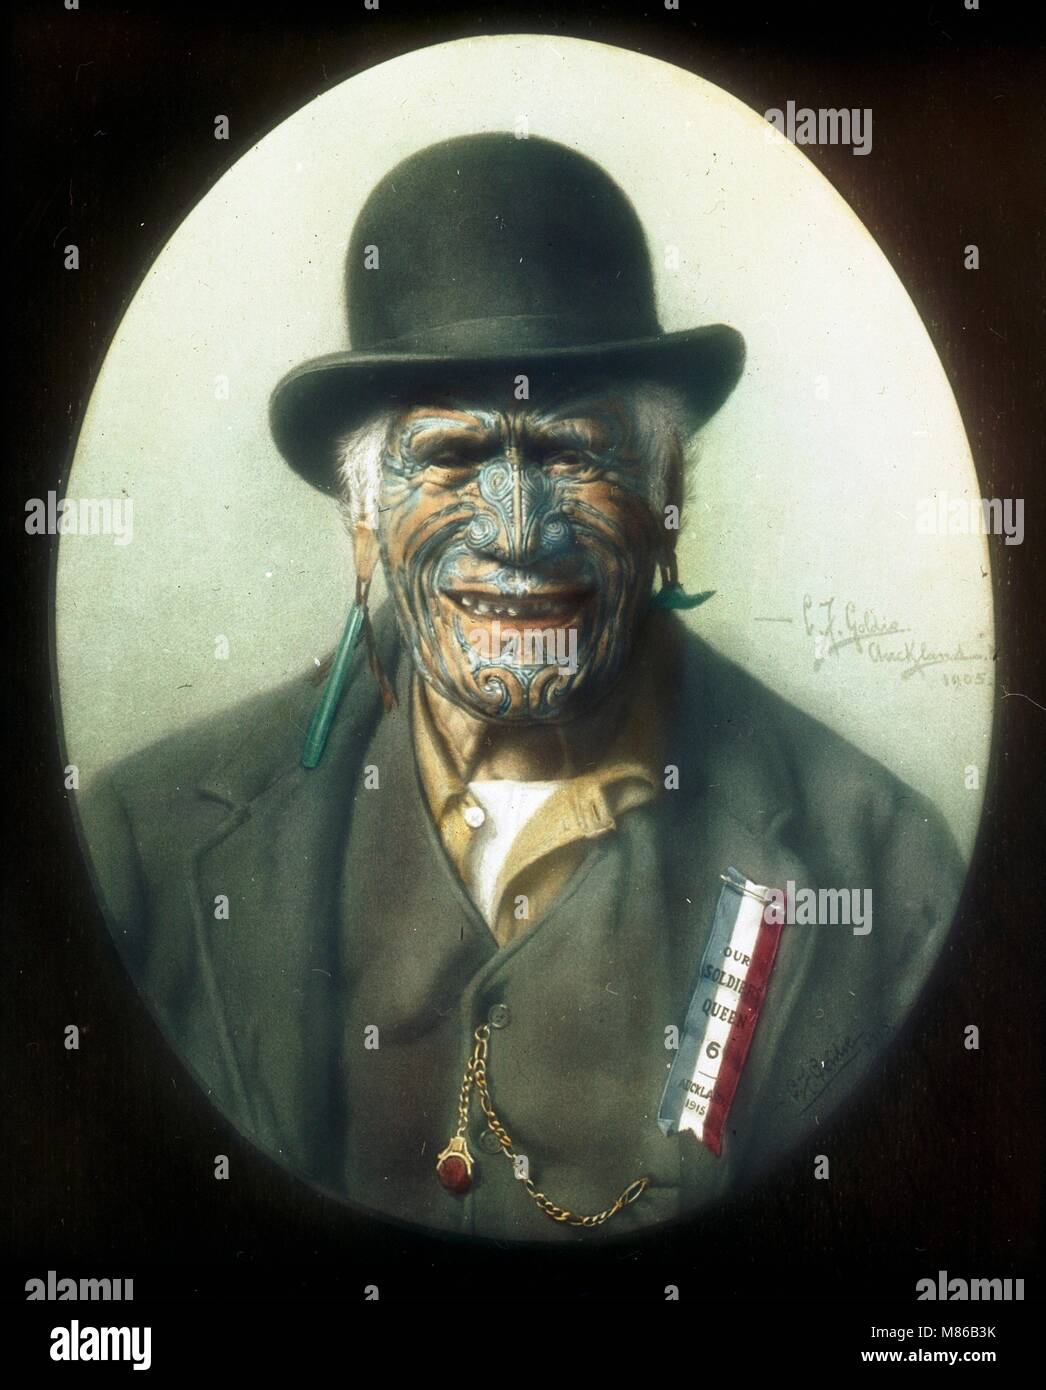 Colorized portrait of Maori warrior and chief Te Aho-o-te-Rangi Wharepu (1811-1910) wearing a derby hat and ‘Our Soldiers Queen, Auckland 1915’ badge, Auckland, New Zealand, 1917. Originally photographed by Charles Goldie in 1905 and colorized by Burton Holmes in 1917. (Photo by Charles Goldie) Stock Photo